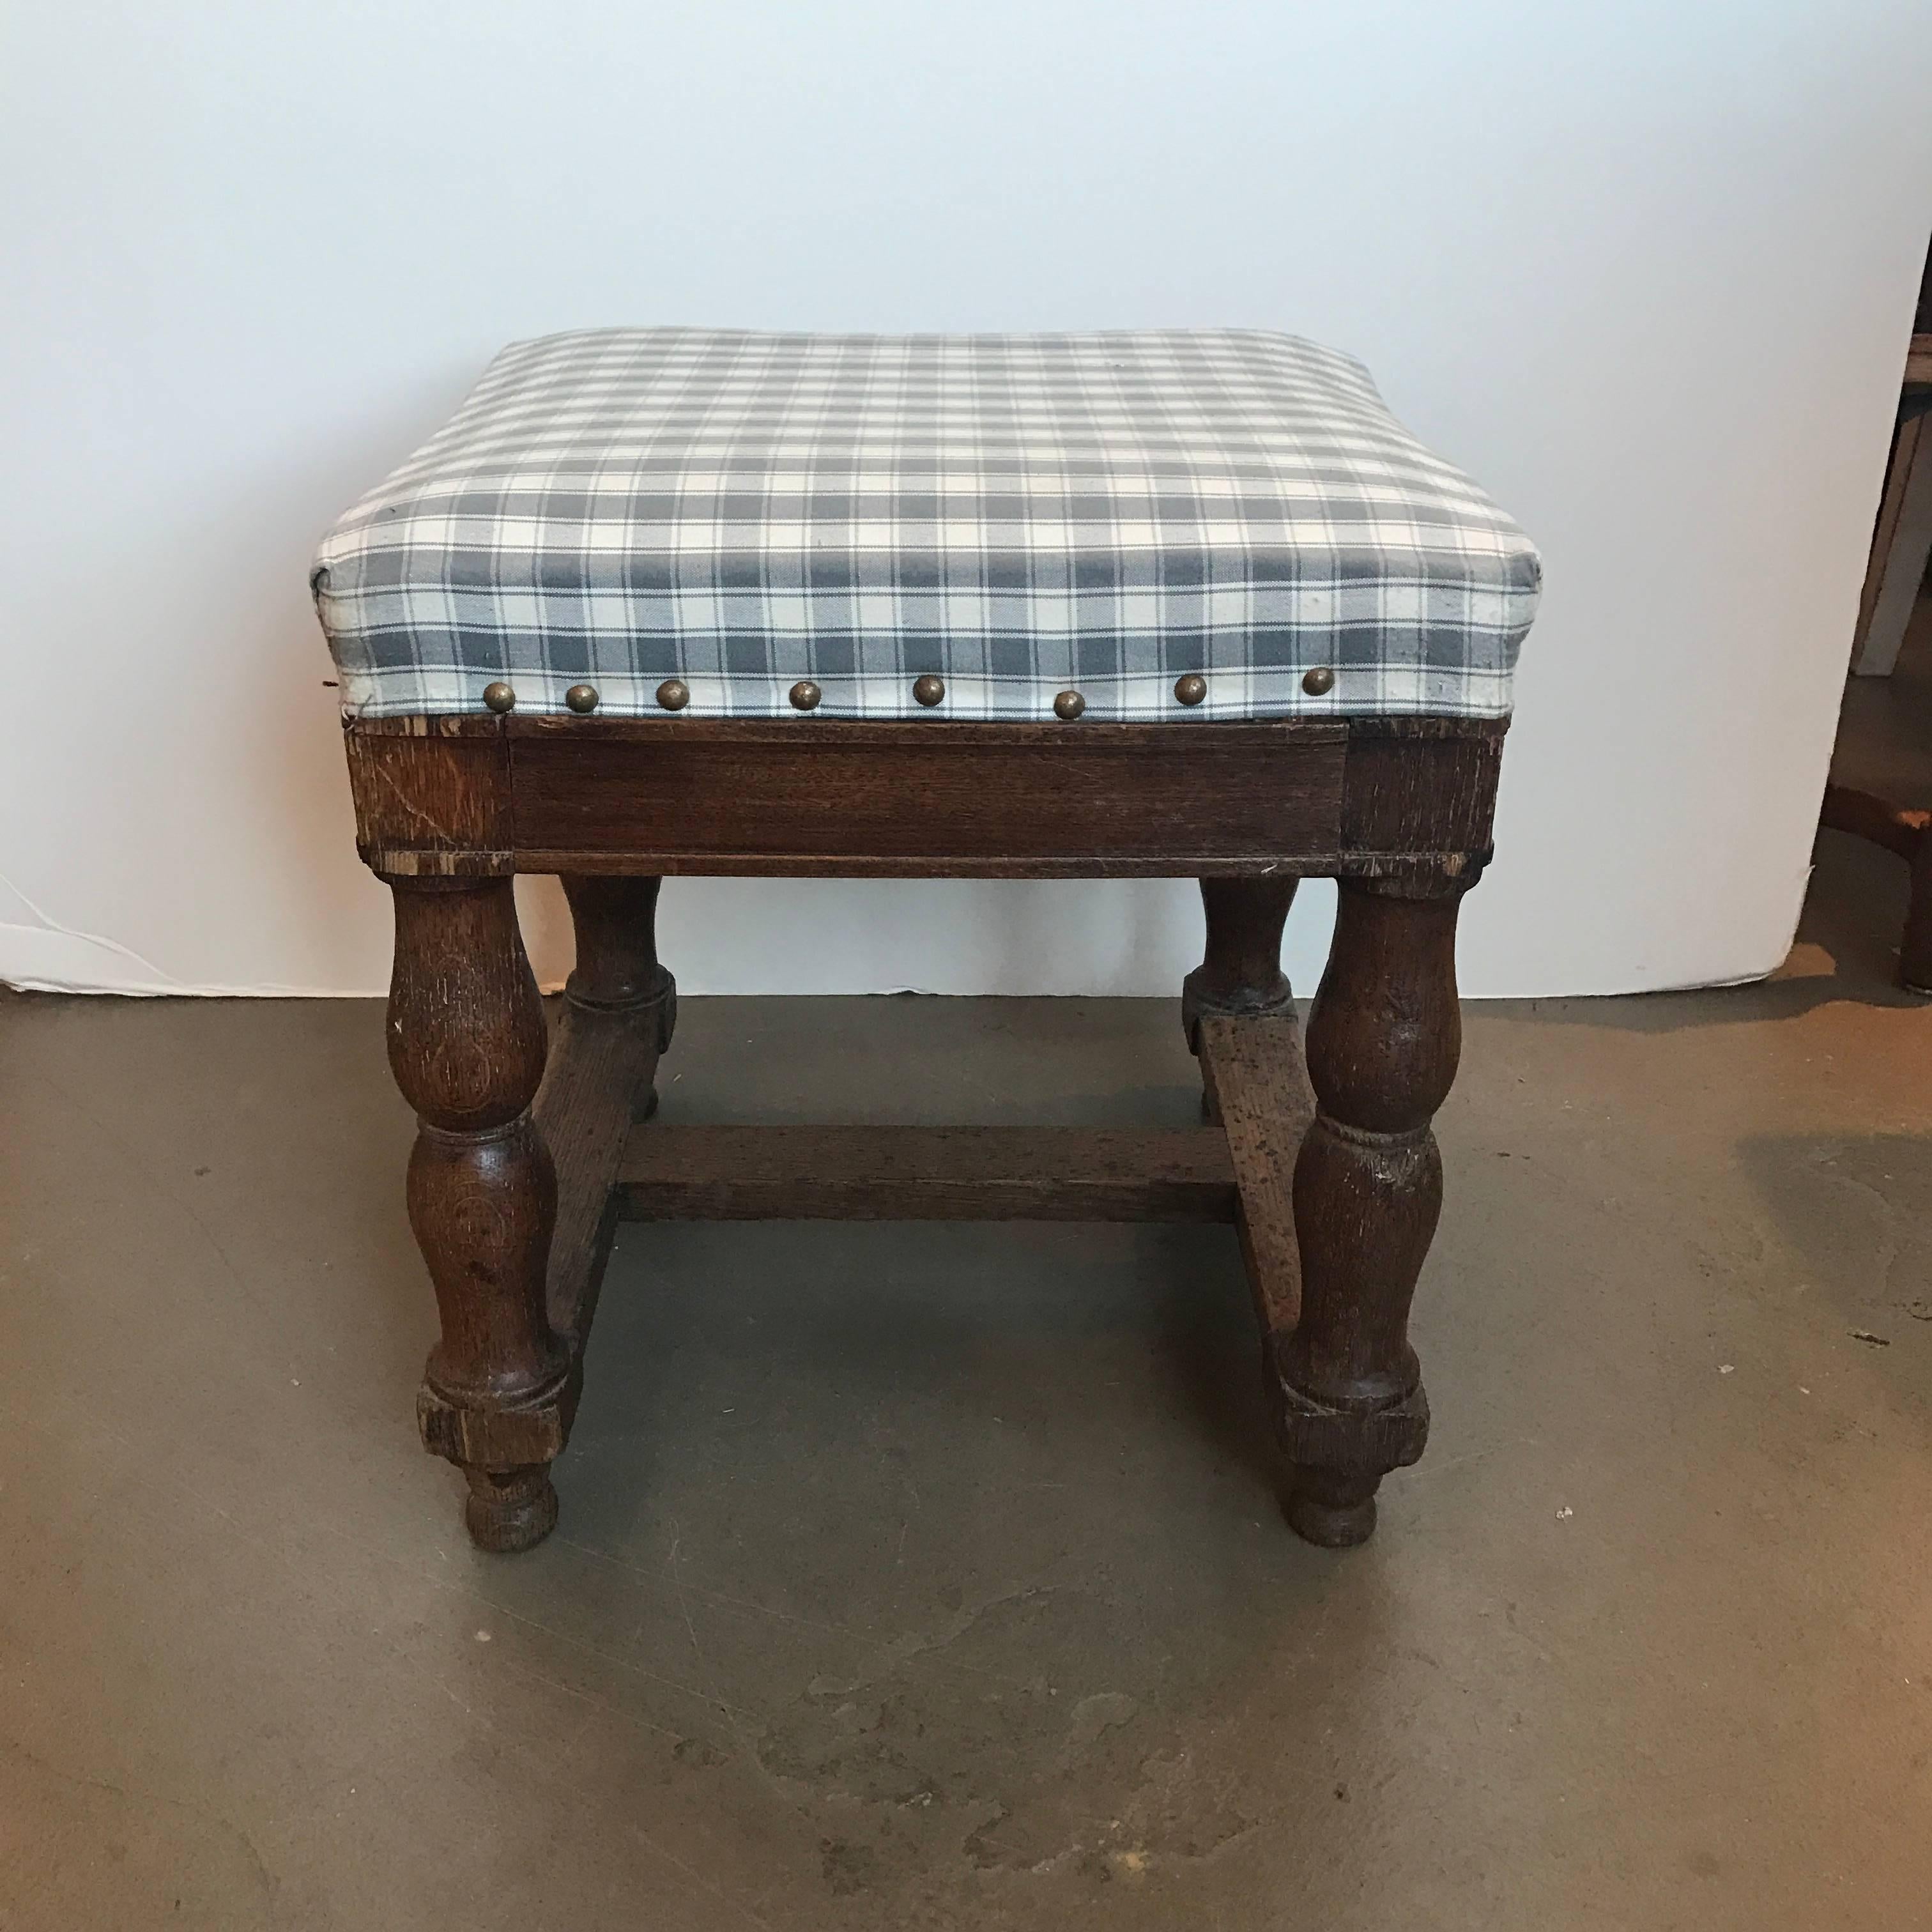 19th century upholstered stool with nailheads.